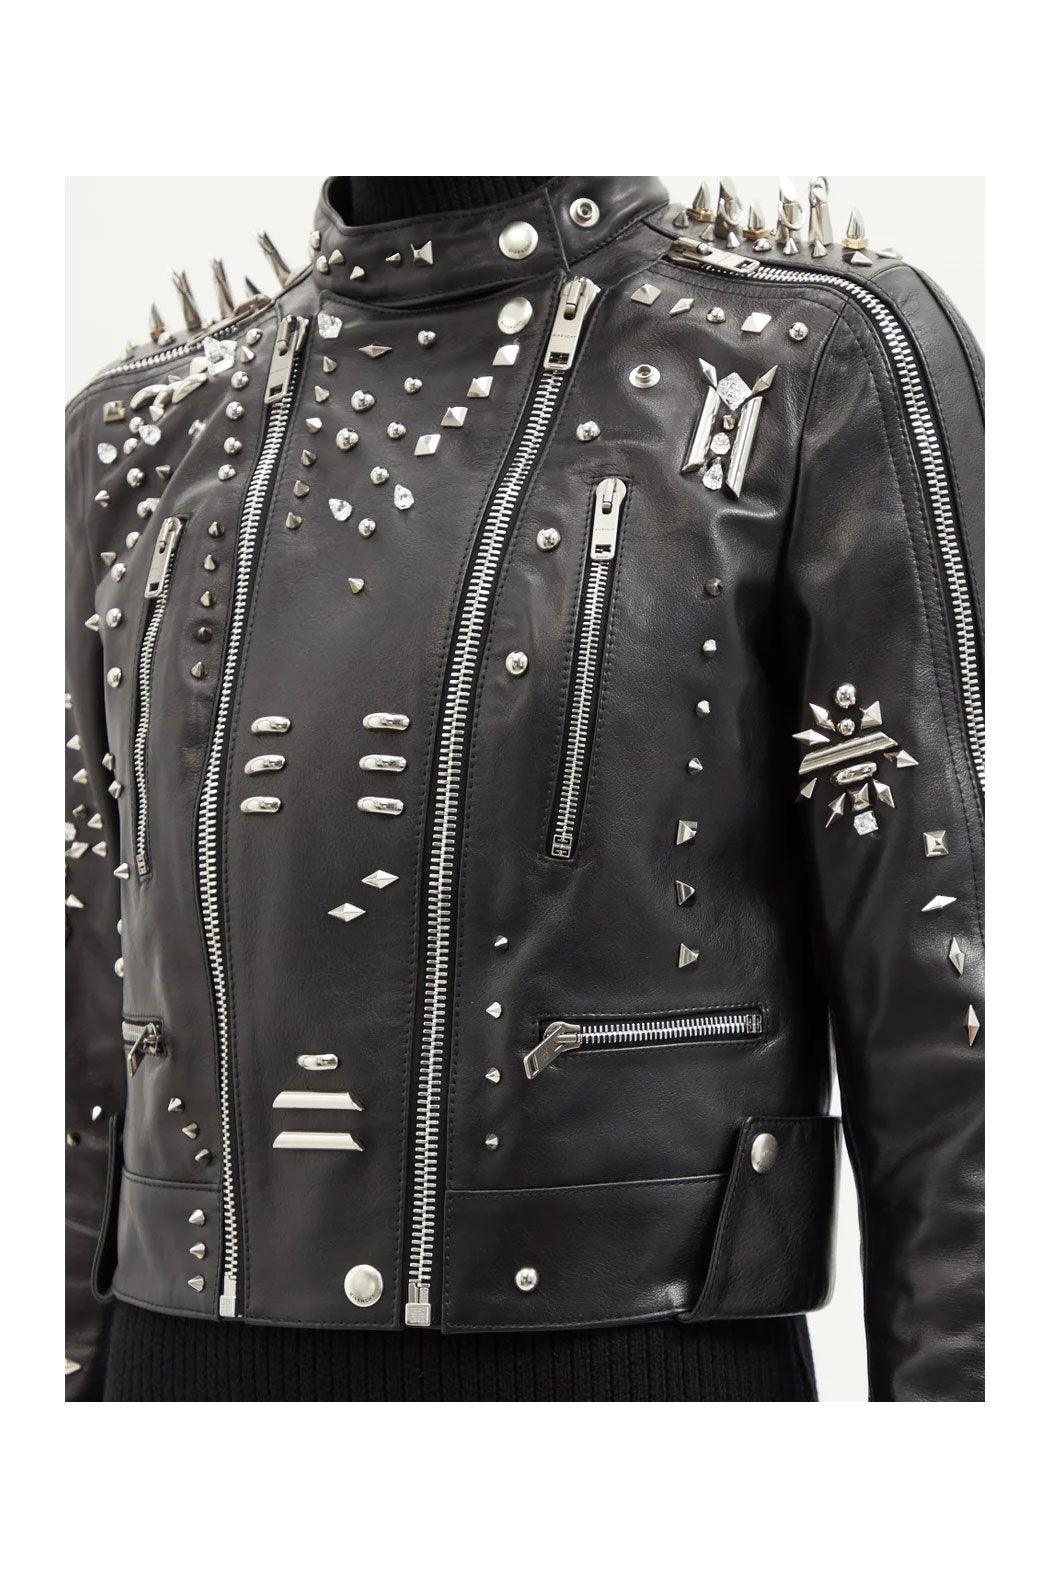 Black Women style Silver Long Spiked Studded Motorcycle Leather Jacket - Leather Loom